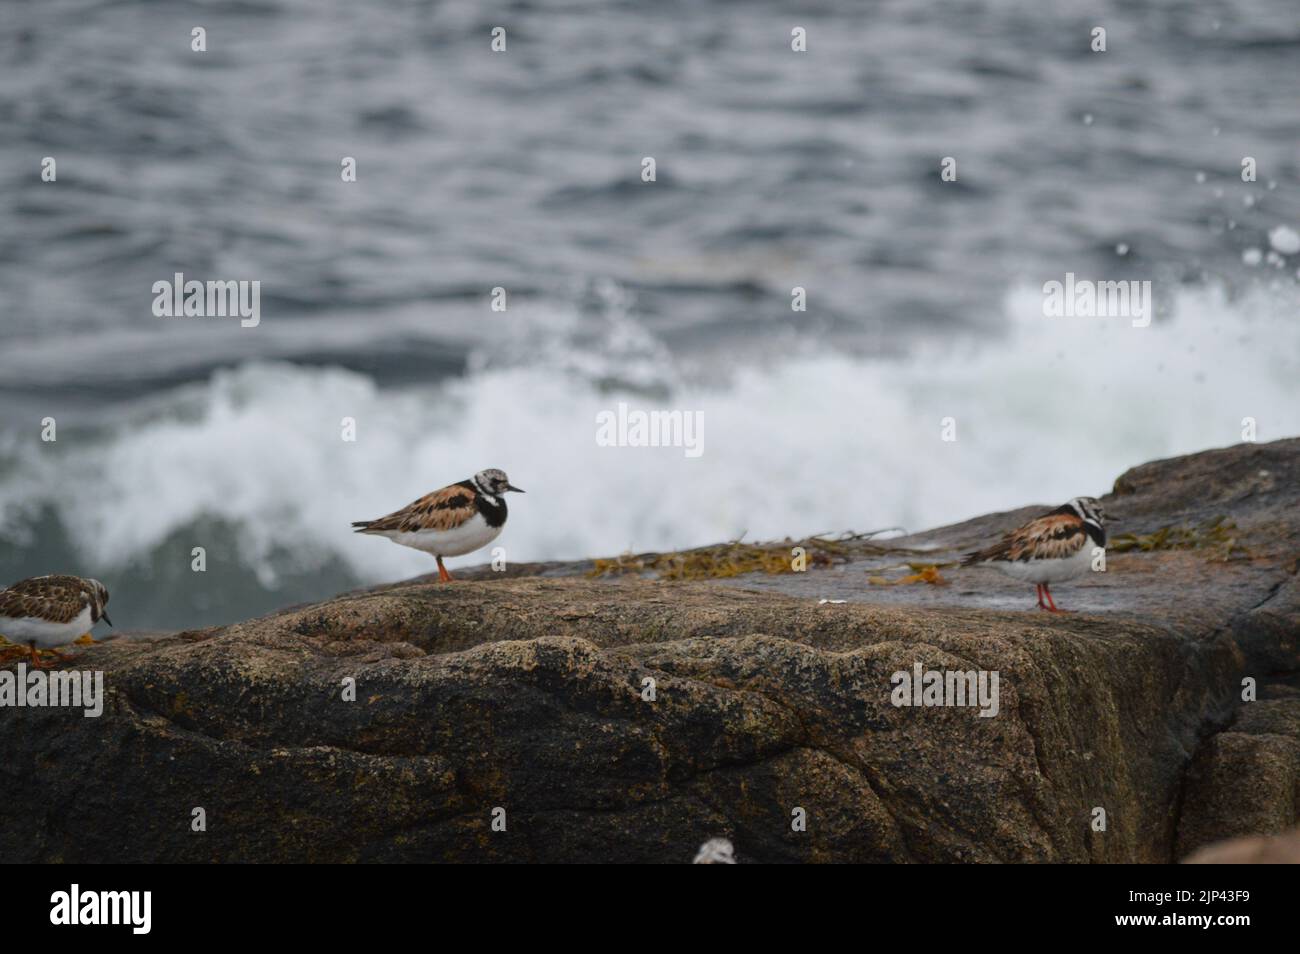 A closeup shot of a group of wading ruddy turnstones on jetty rocks near the big ocean waves Stock Photo